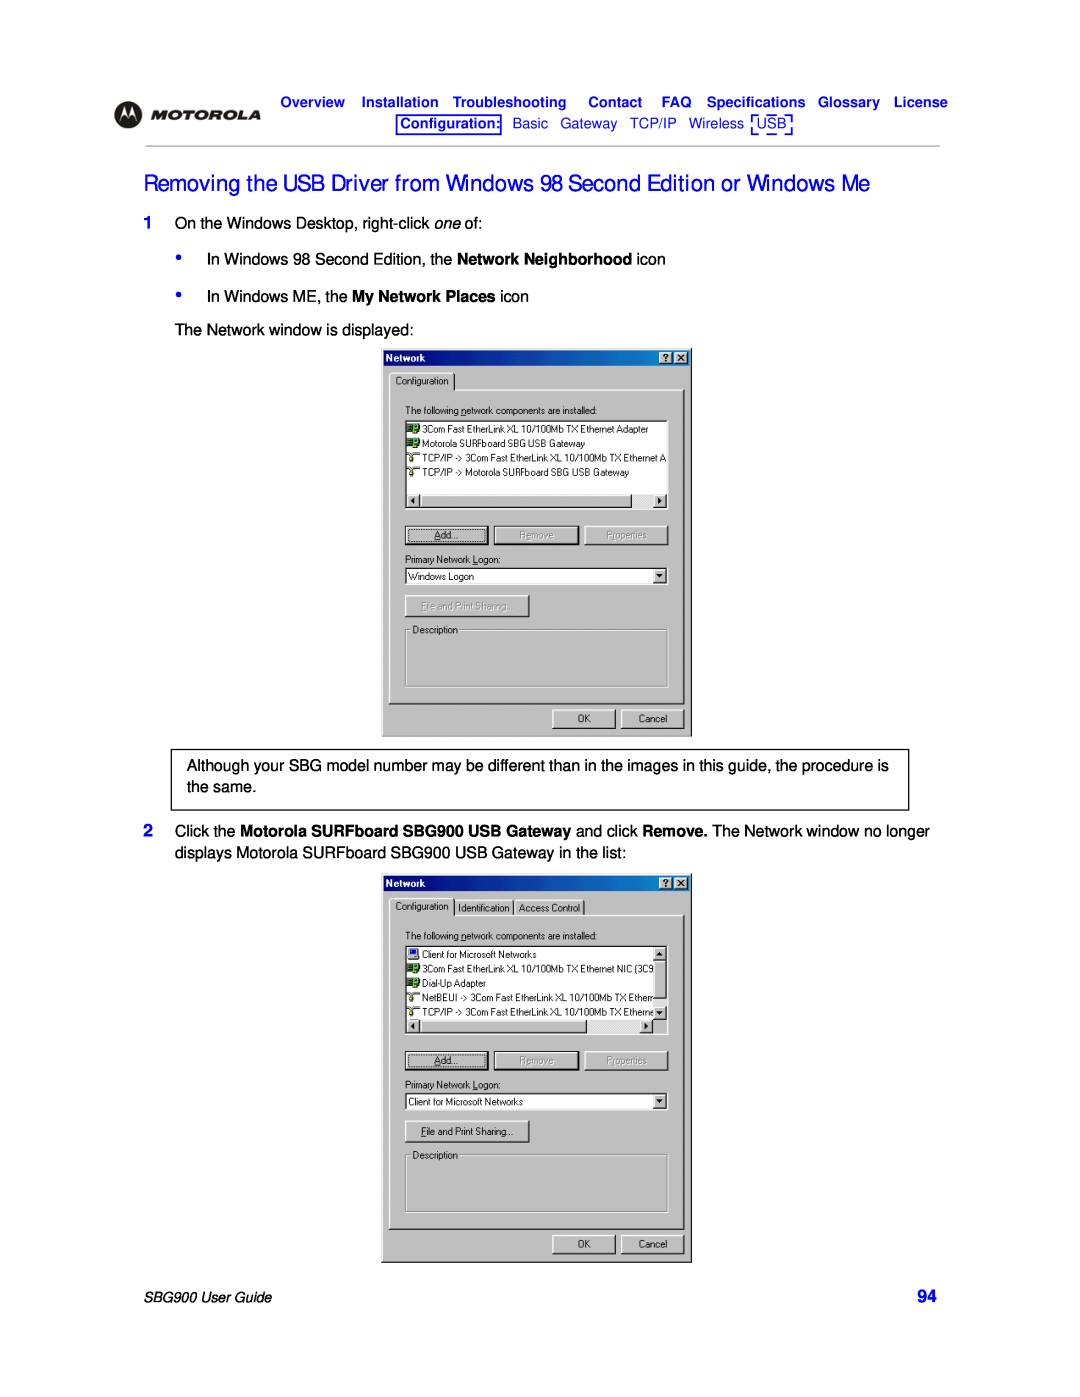 Motorola SBG900 manual Removing the USB Driver from Windows 98 Second Edition or Windows Me 